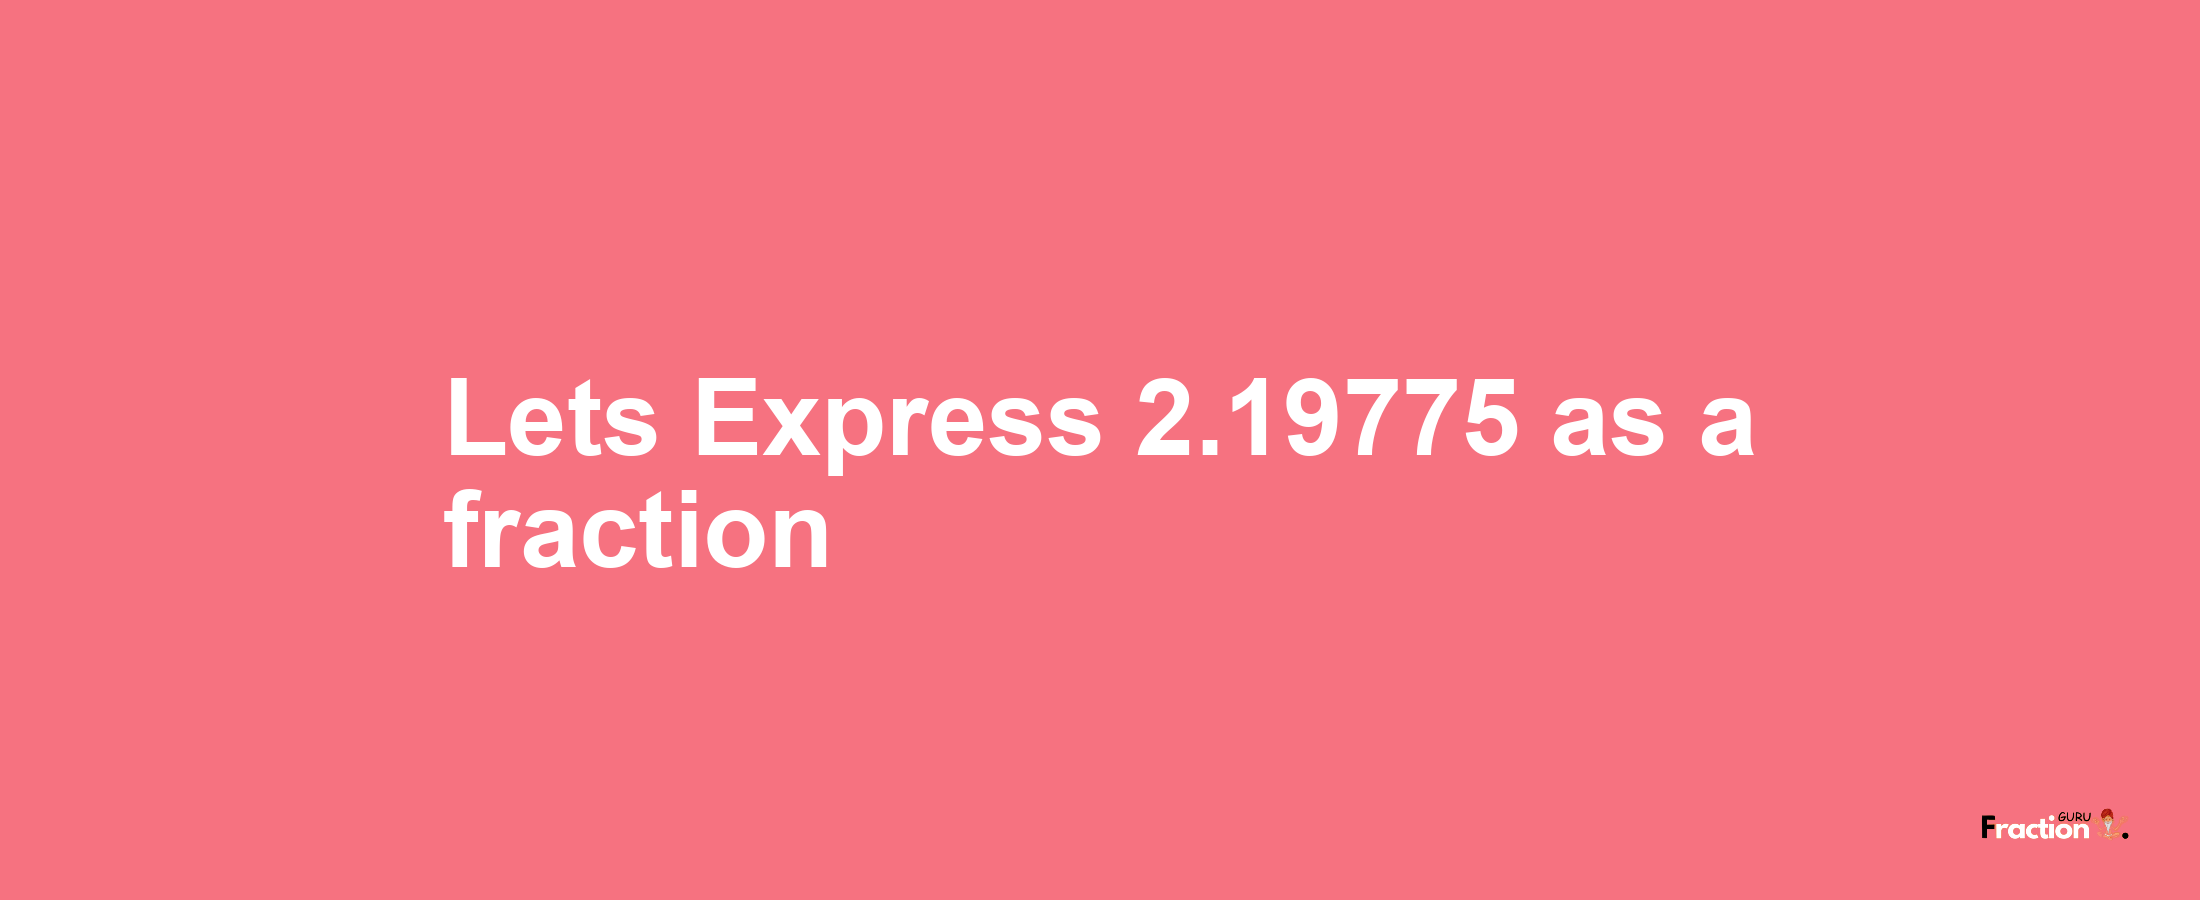 Lets Express 2.19775 as afraction